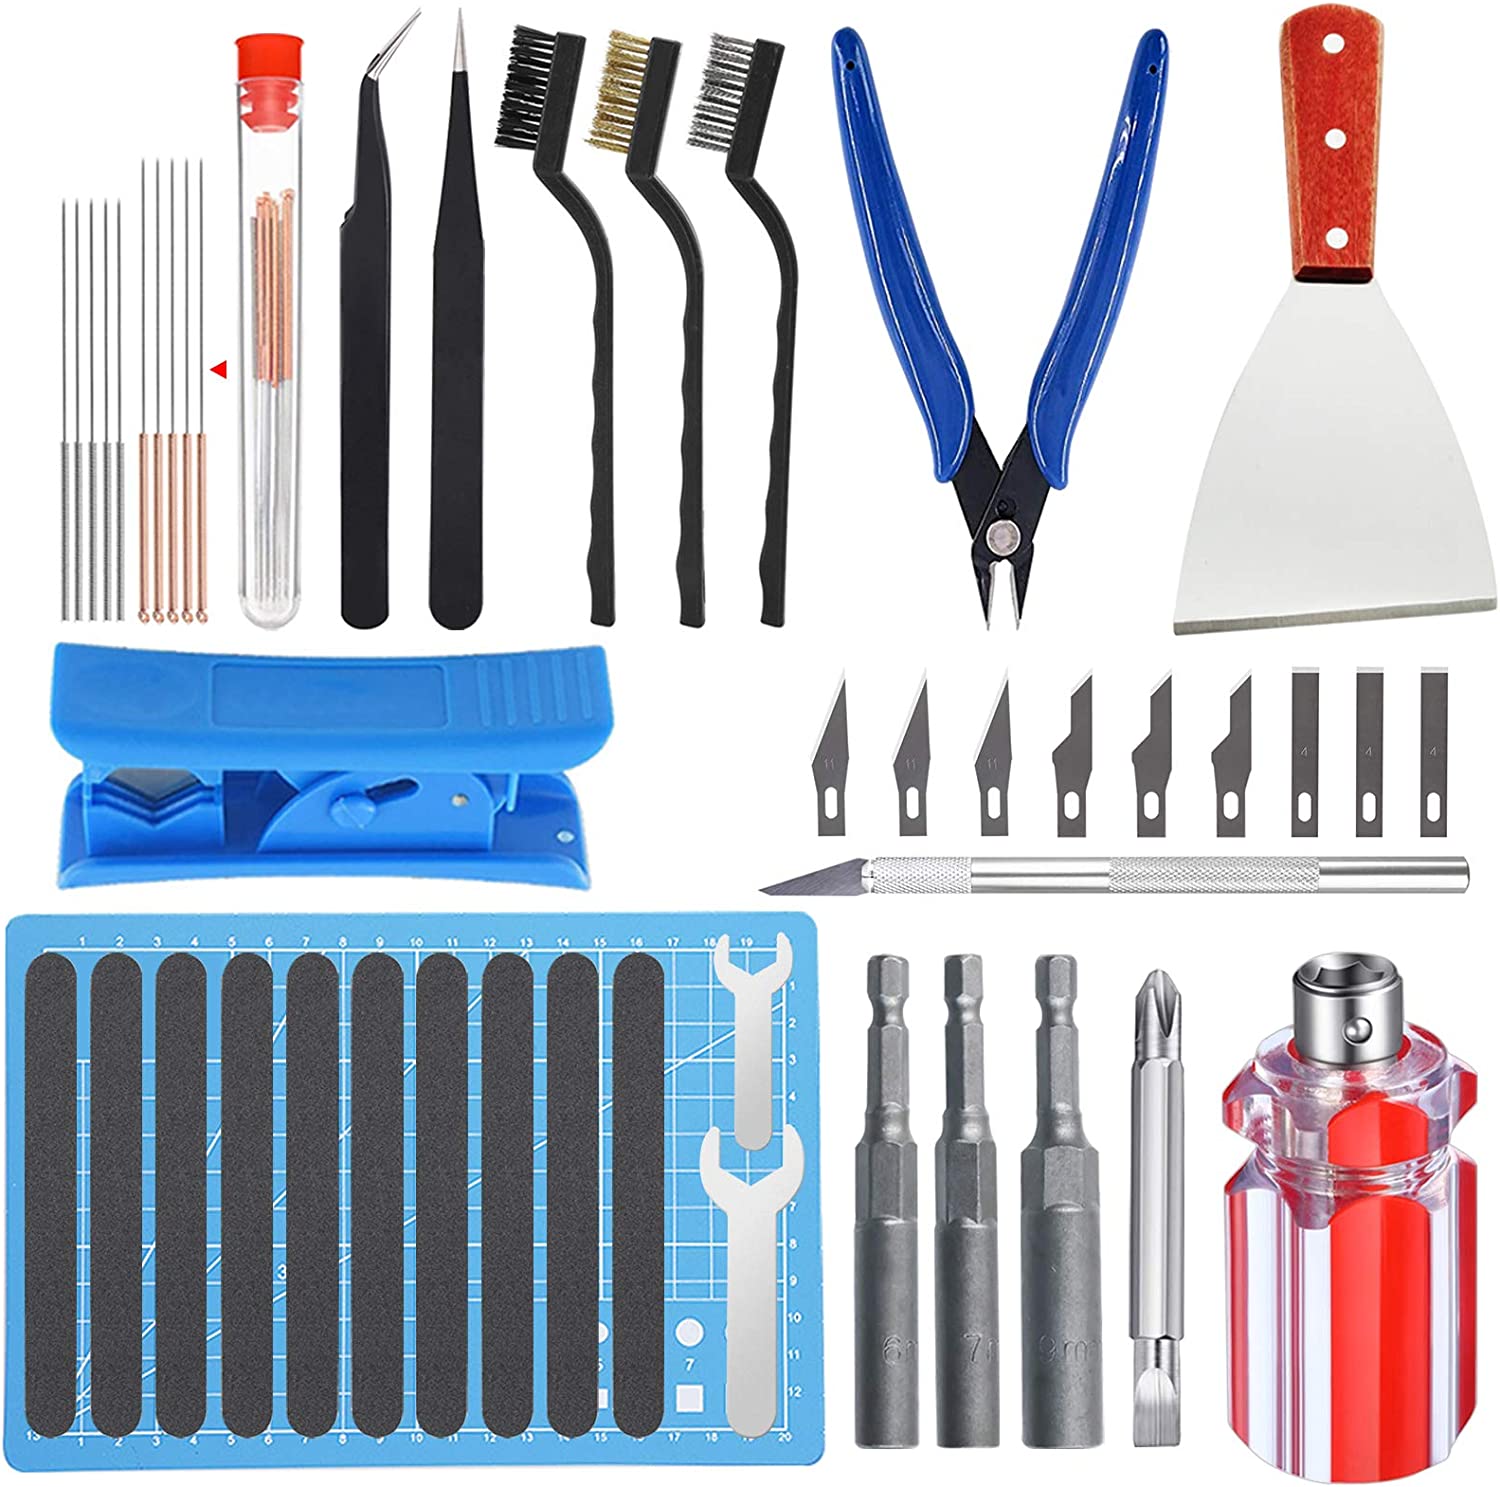 36pcs 3D Printer Accessories Tool Kit for Print Removal, Model Clean Up, Hotend Clogs, Measuring, Cutting